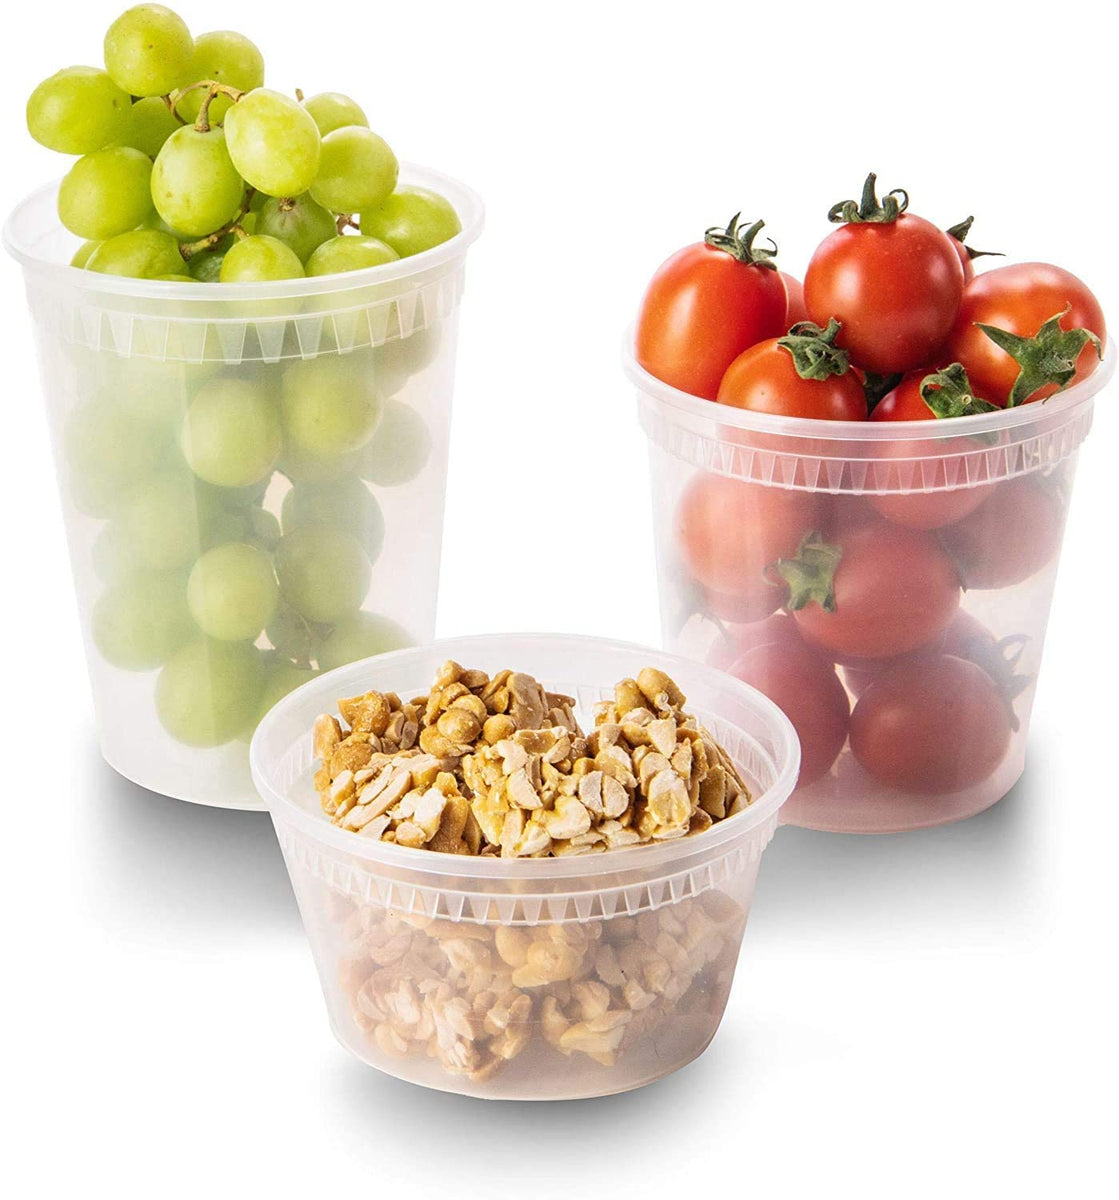 Member's Mark Plastic Deli Containers with Lids (8 oz., 240 ct